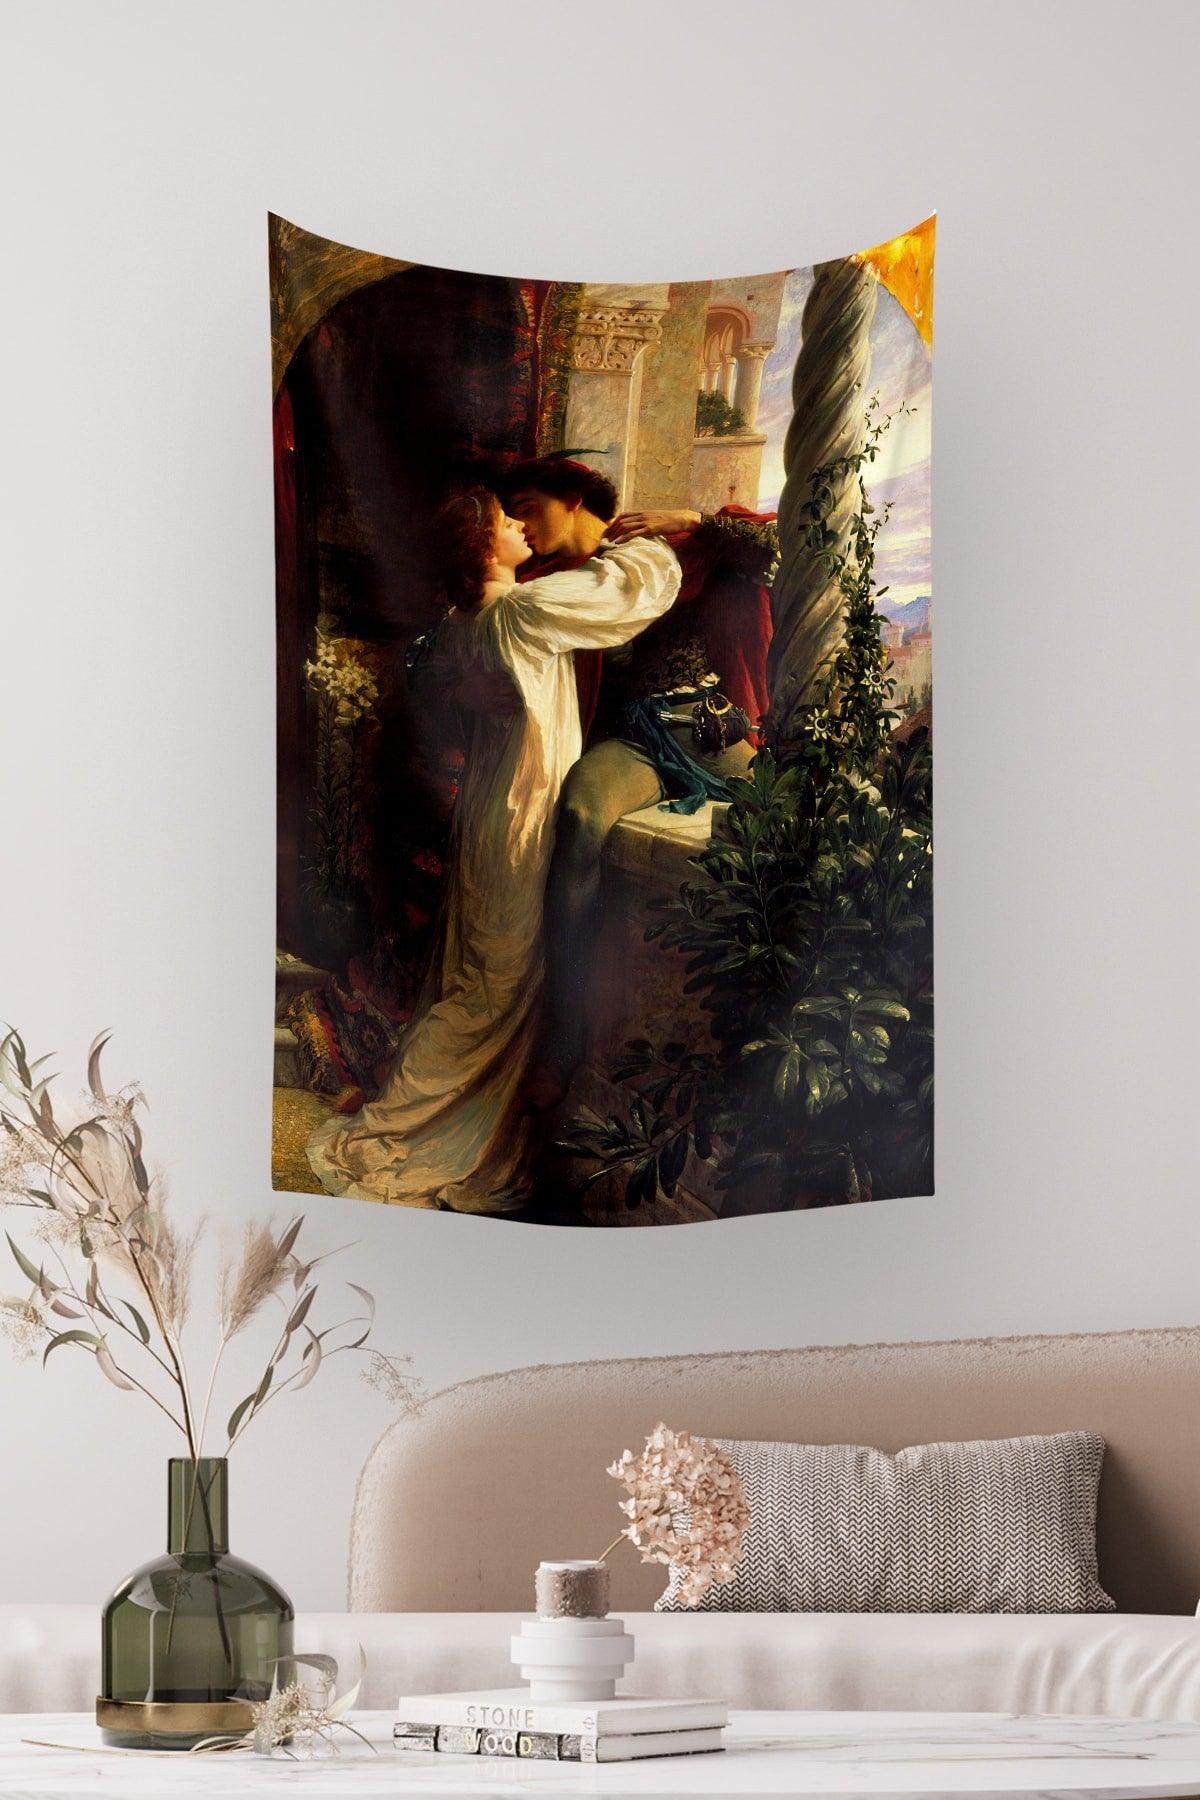 Romeo And Juliet Wall Covering Carpet 70x100, 100x140 Cm - Swordslife